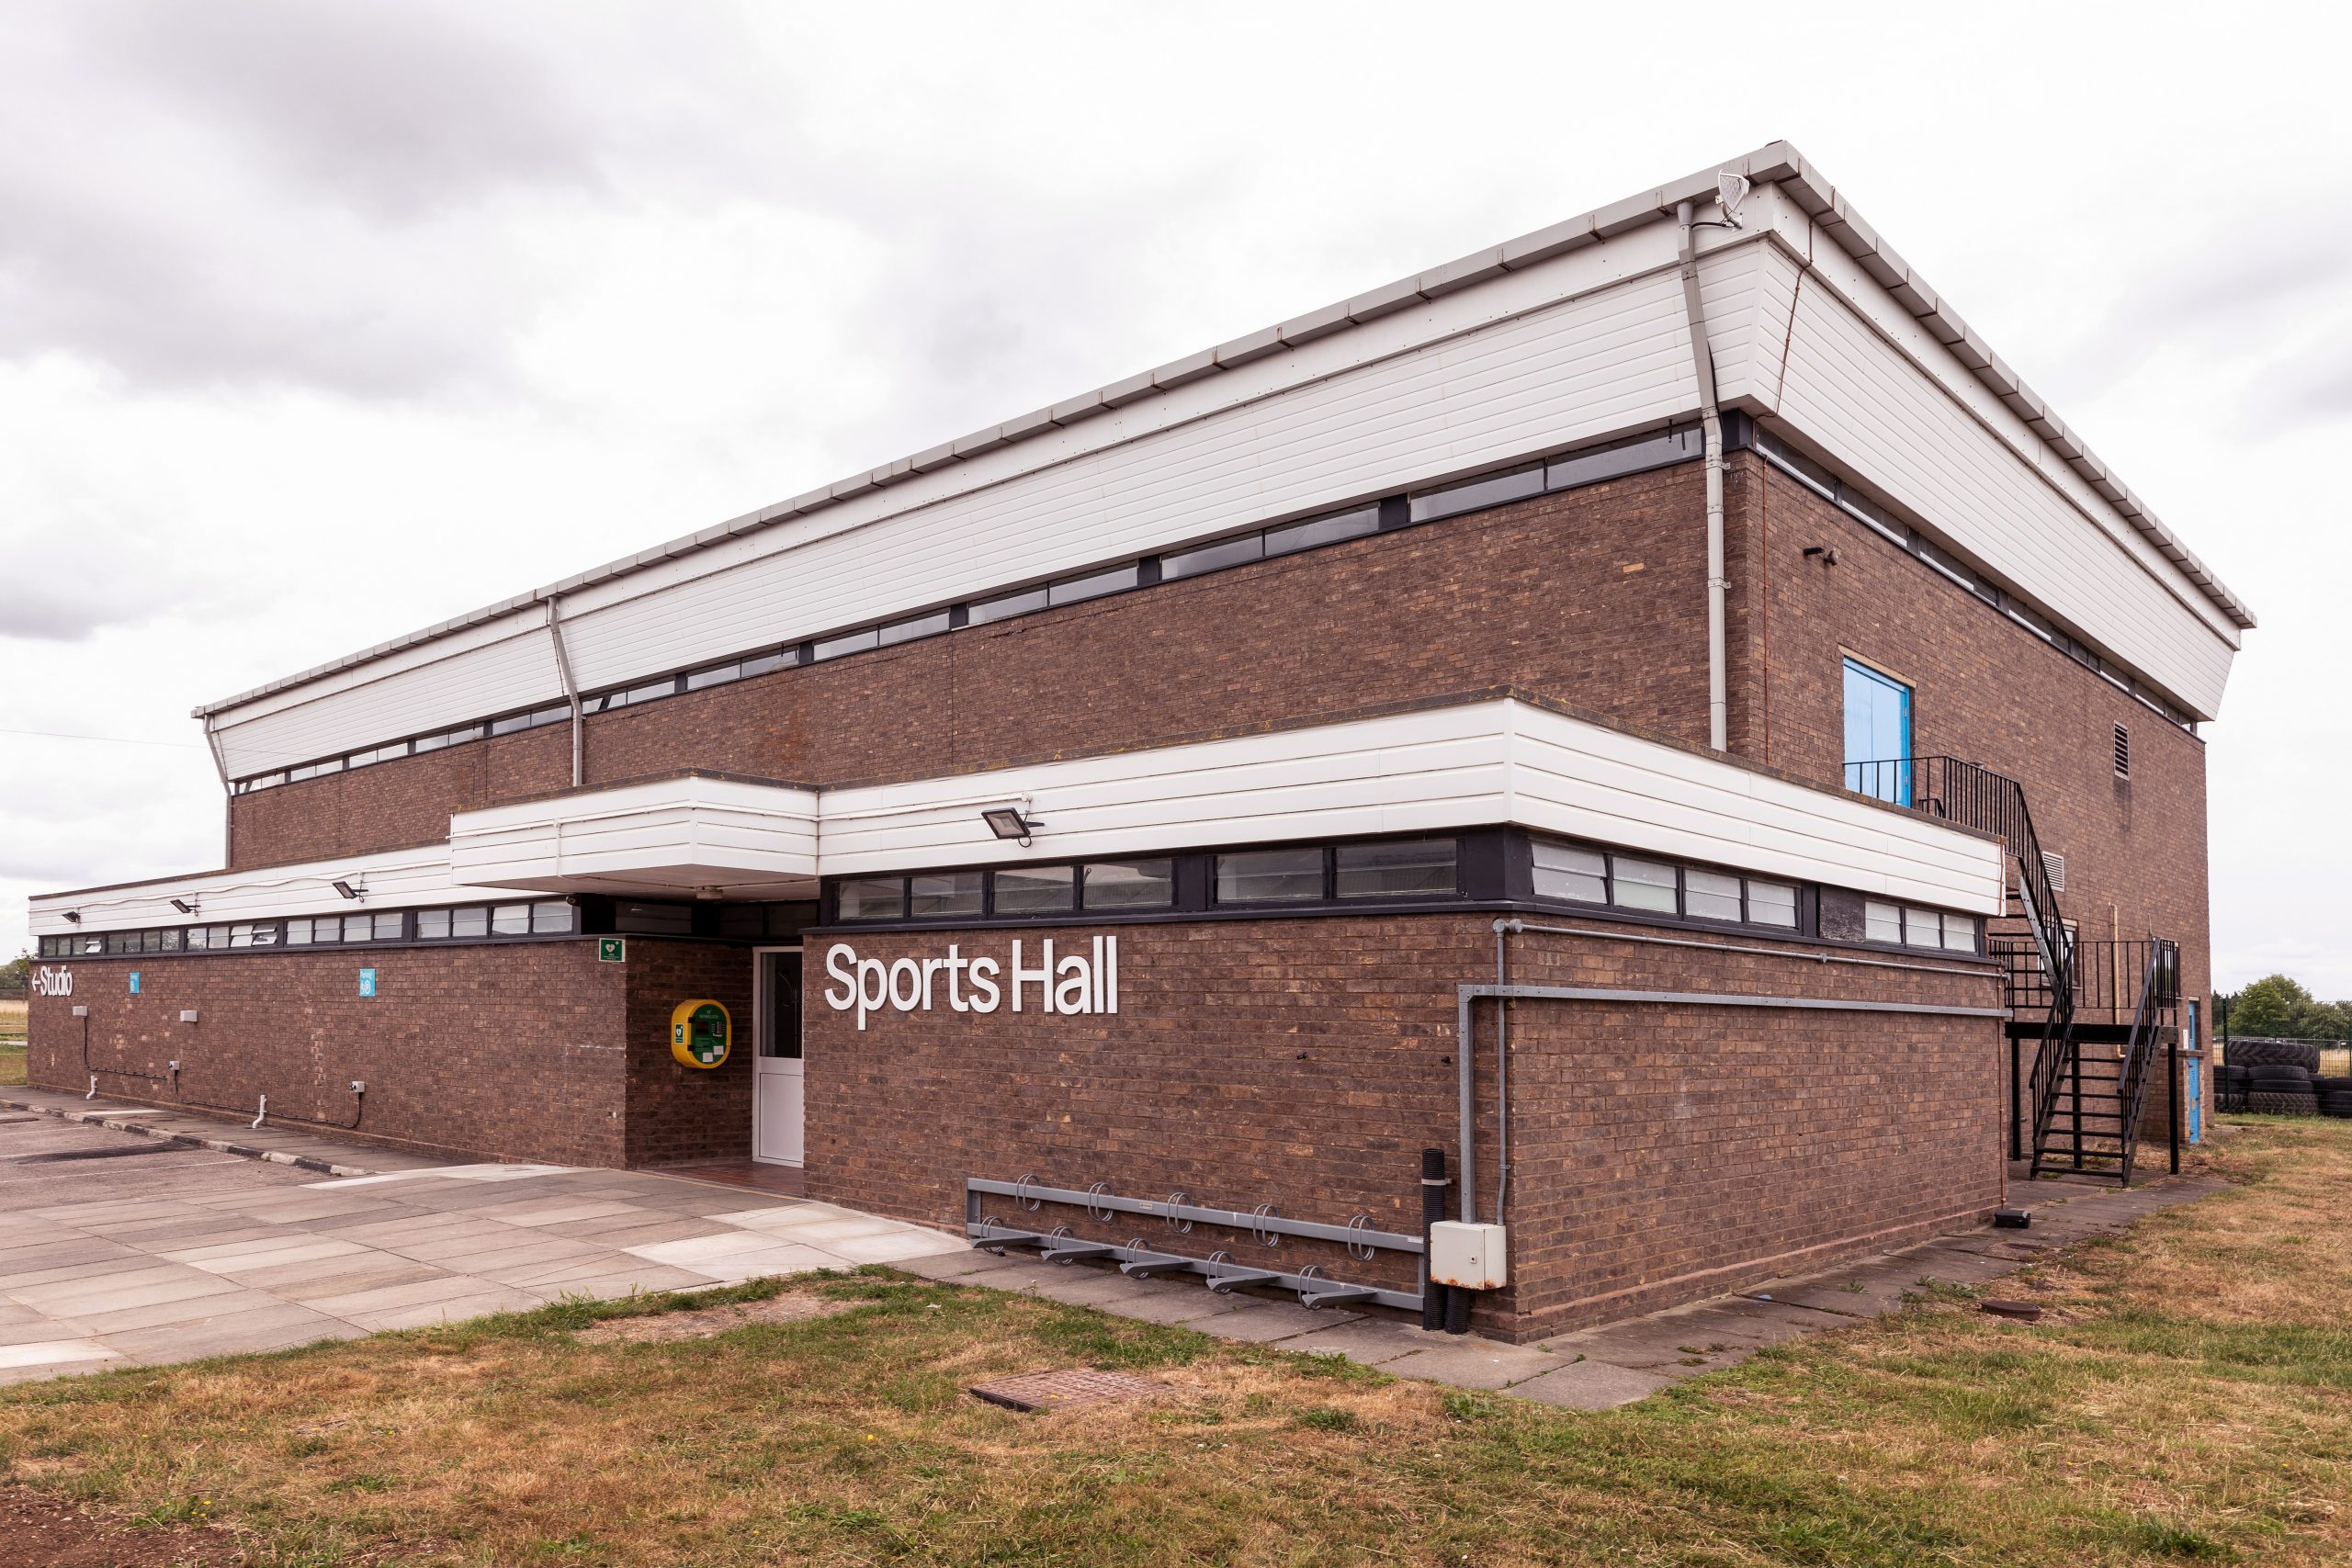 Historic sports hall given new lease of life at Waterbeach Barracks